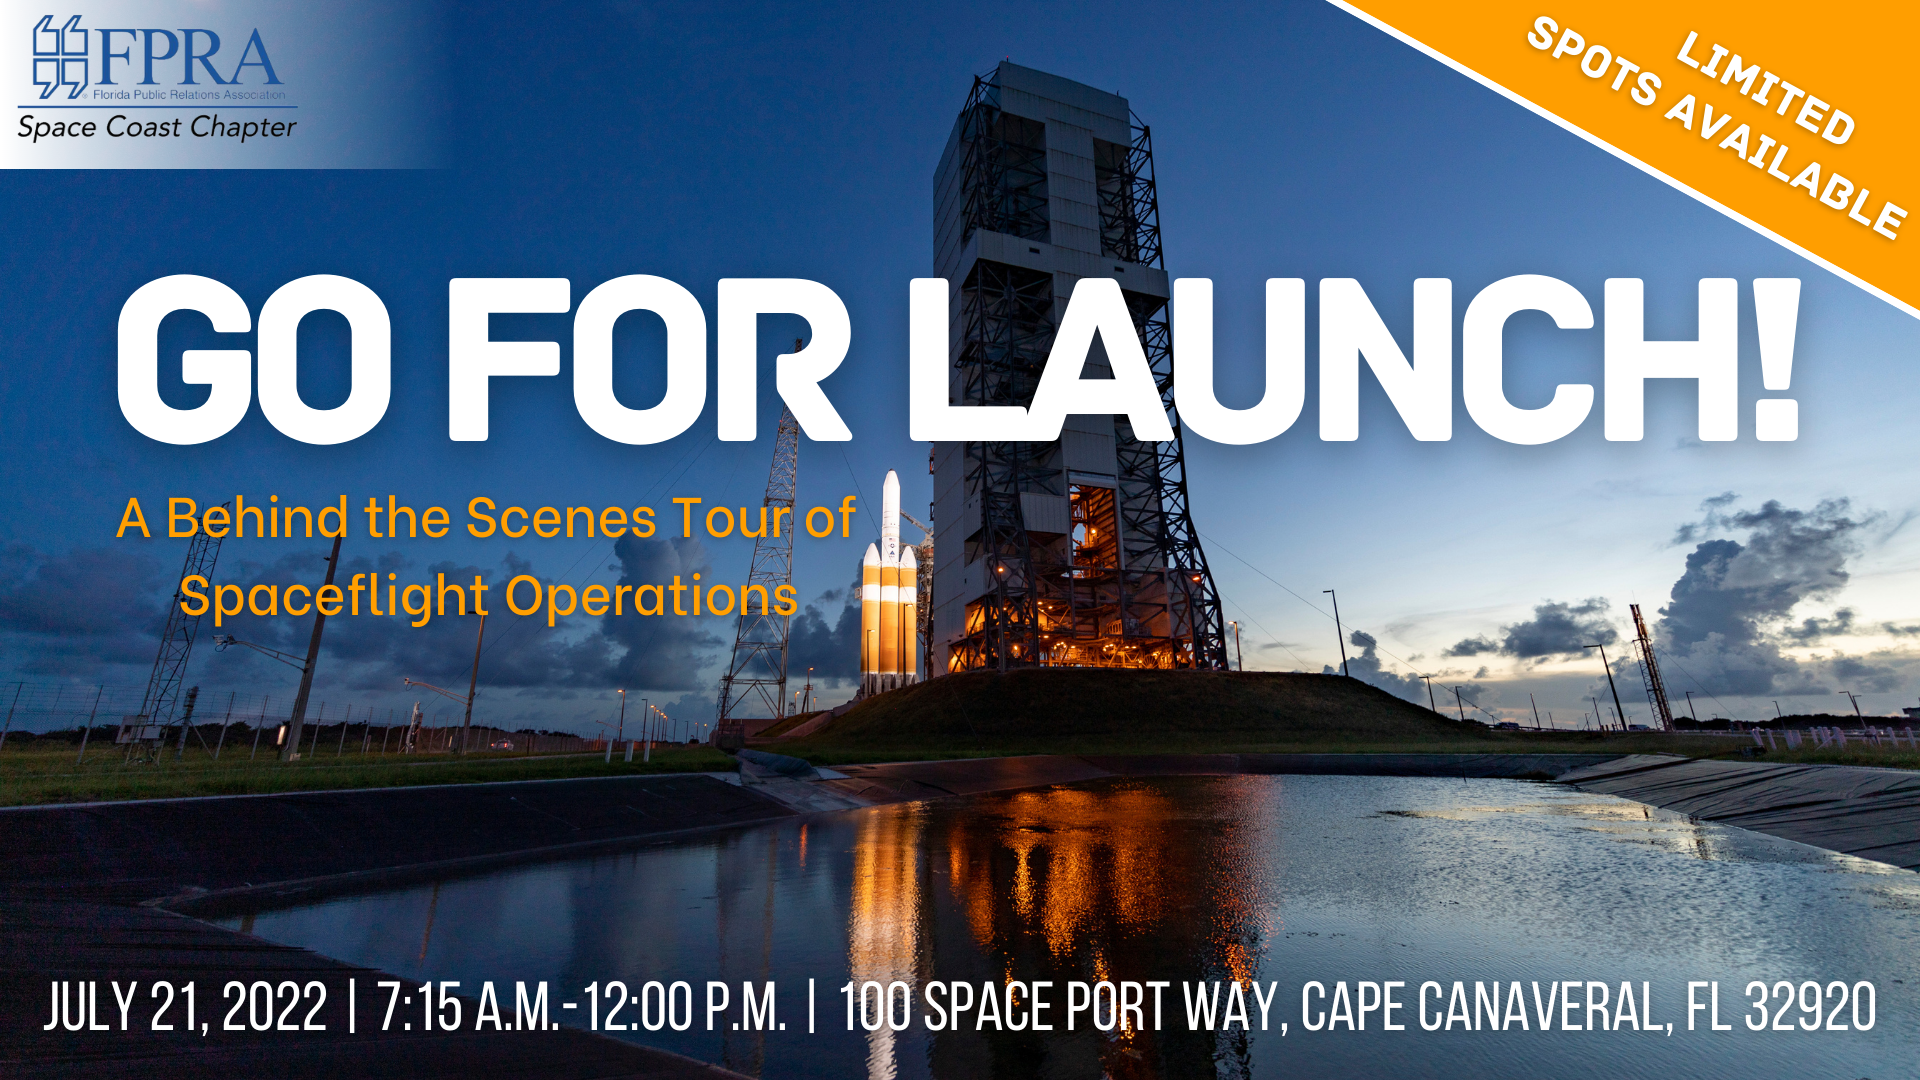 Go For Launch- A Behind the Scenes Tour of Spaceflight